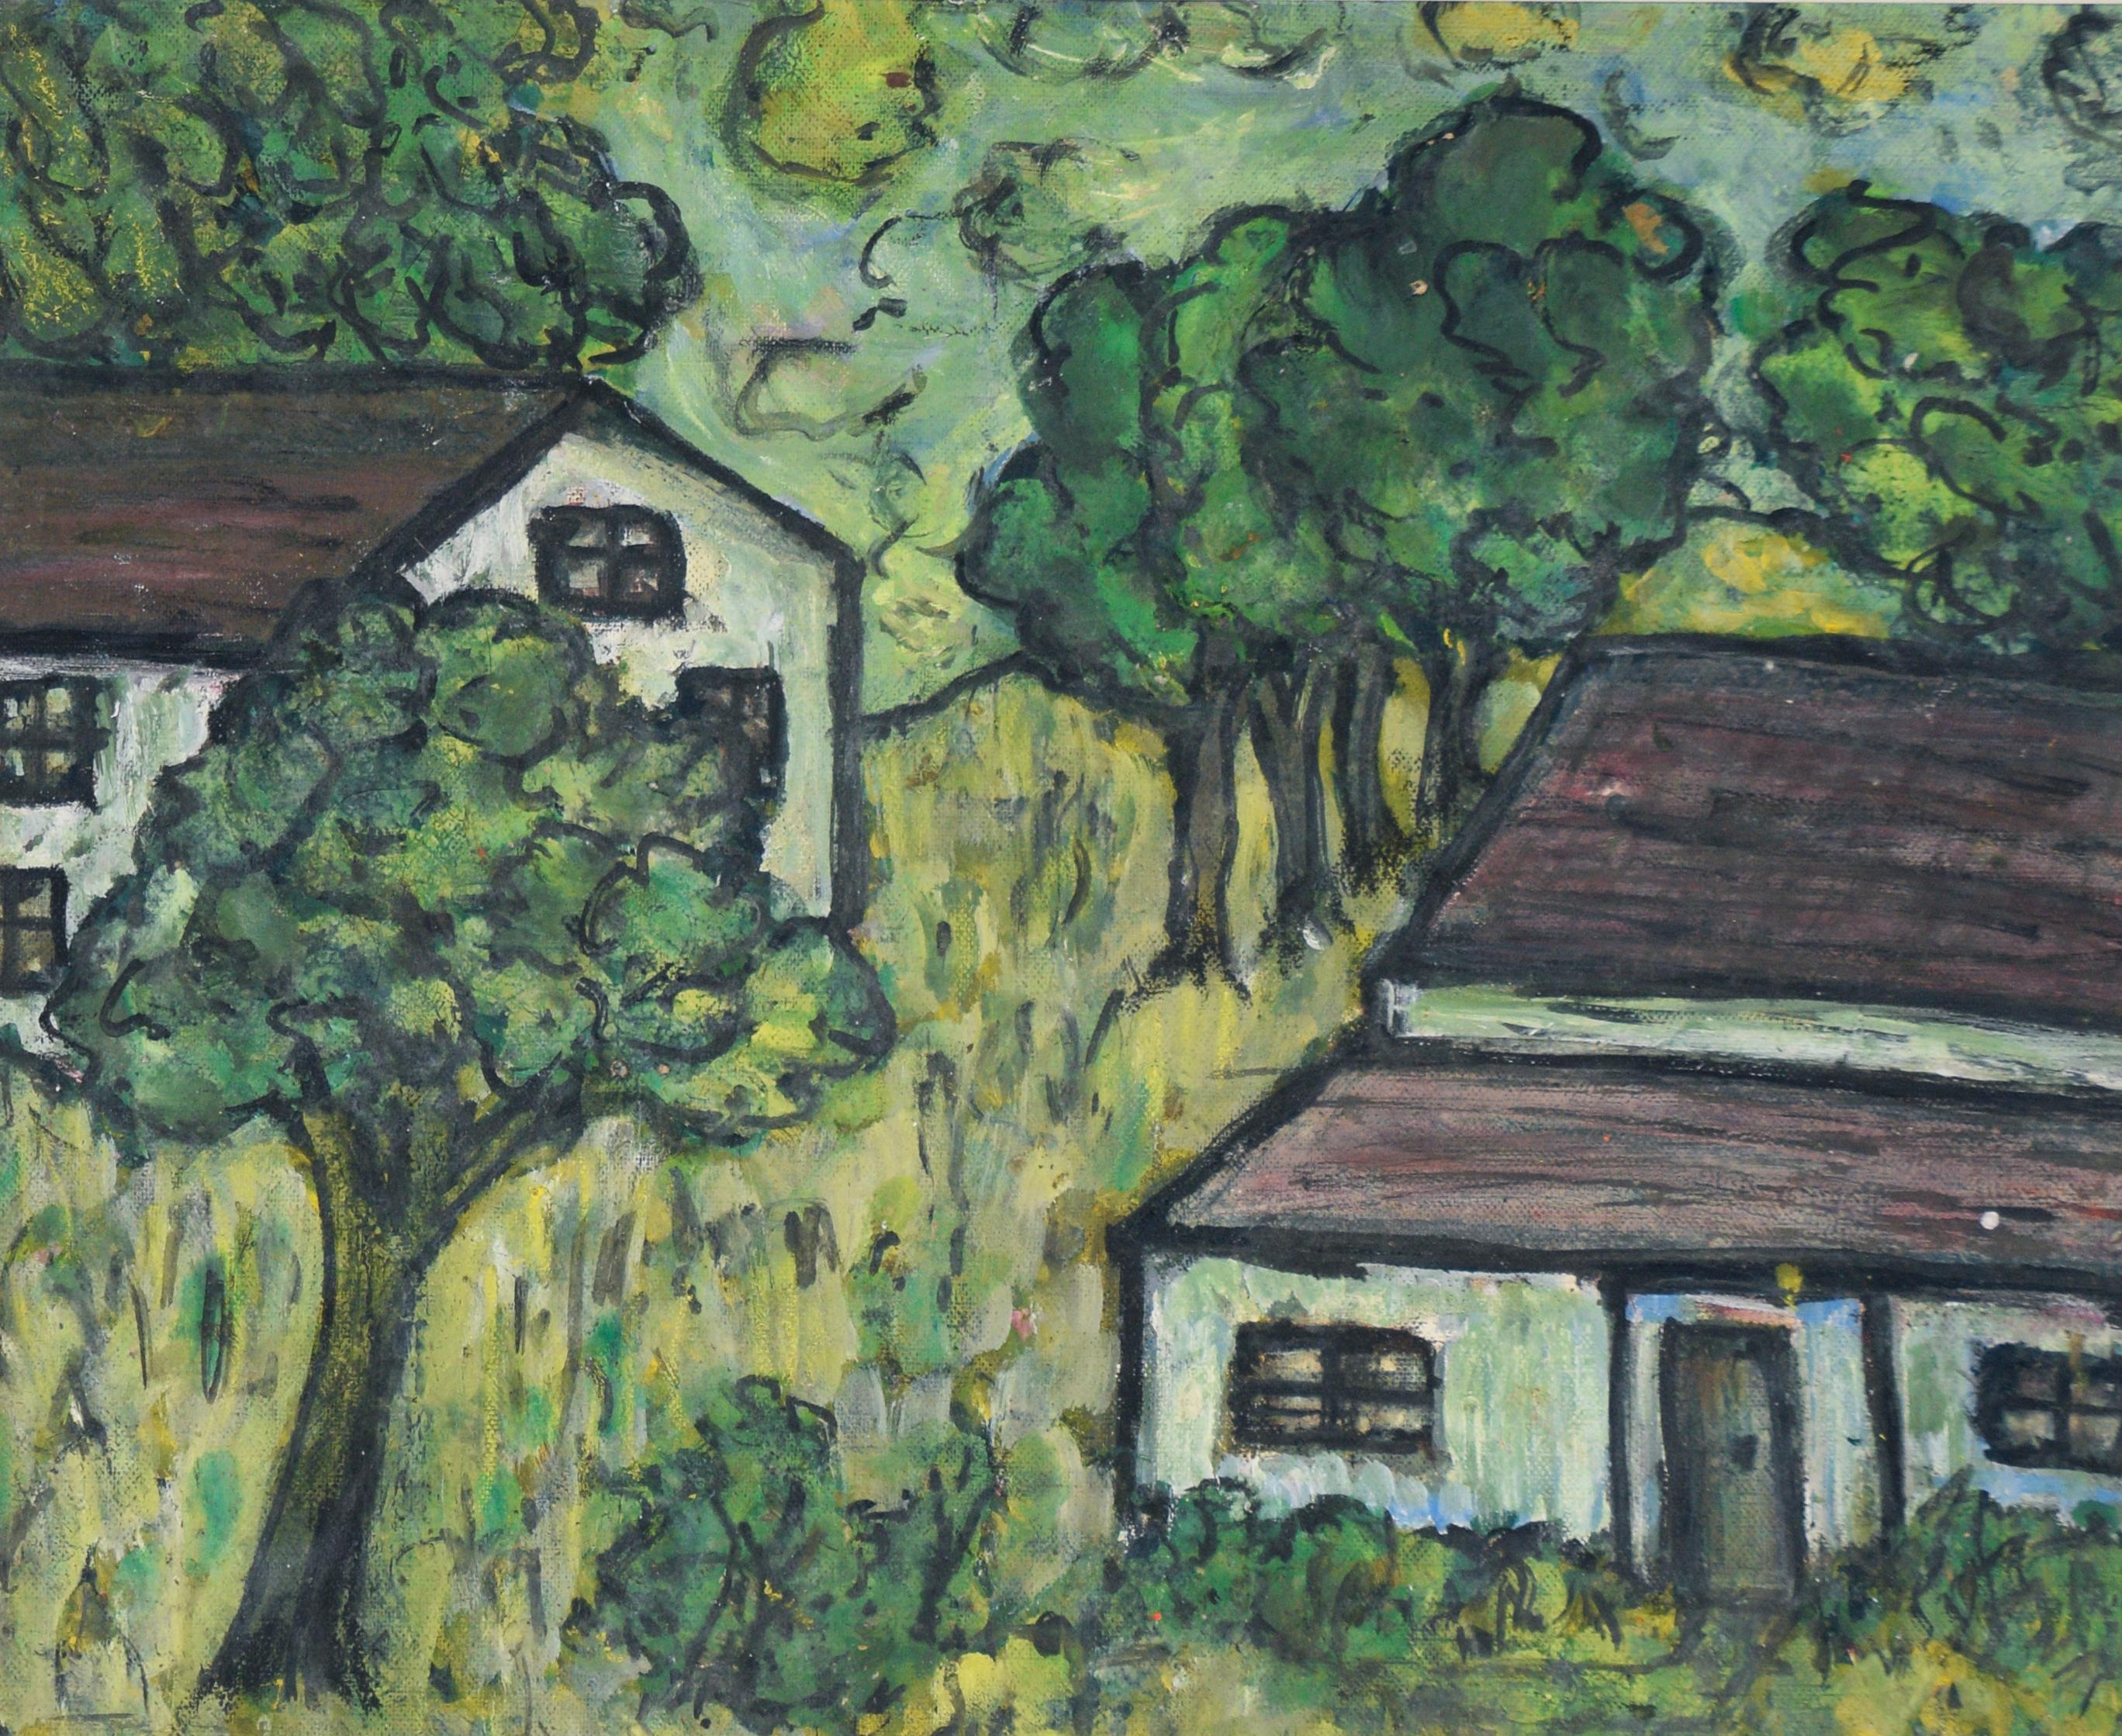 House In The Green - Original Acrylic On Paper

Original acrylic painting depicting a white house in the woods surrounded by greenery by Honora Berg (American, 1897-1985). Two white houses are the focal point, hues of greens and yellows make up the